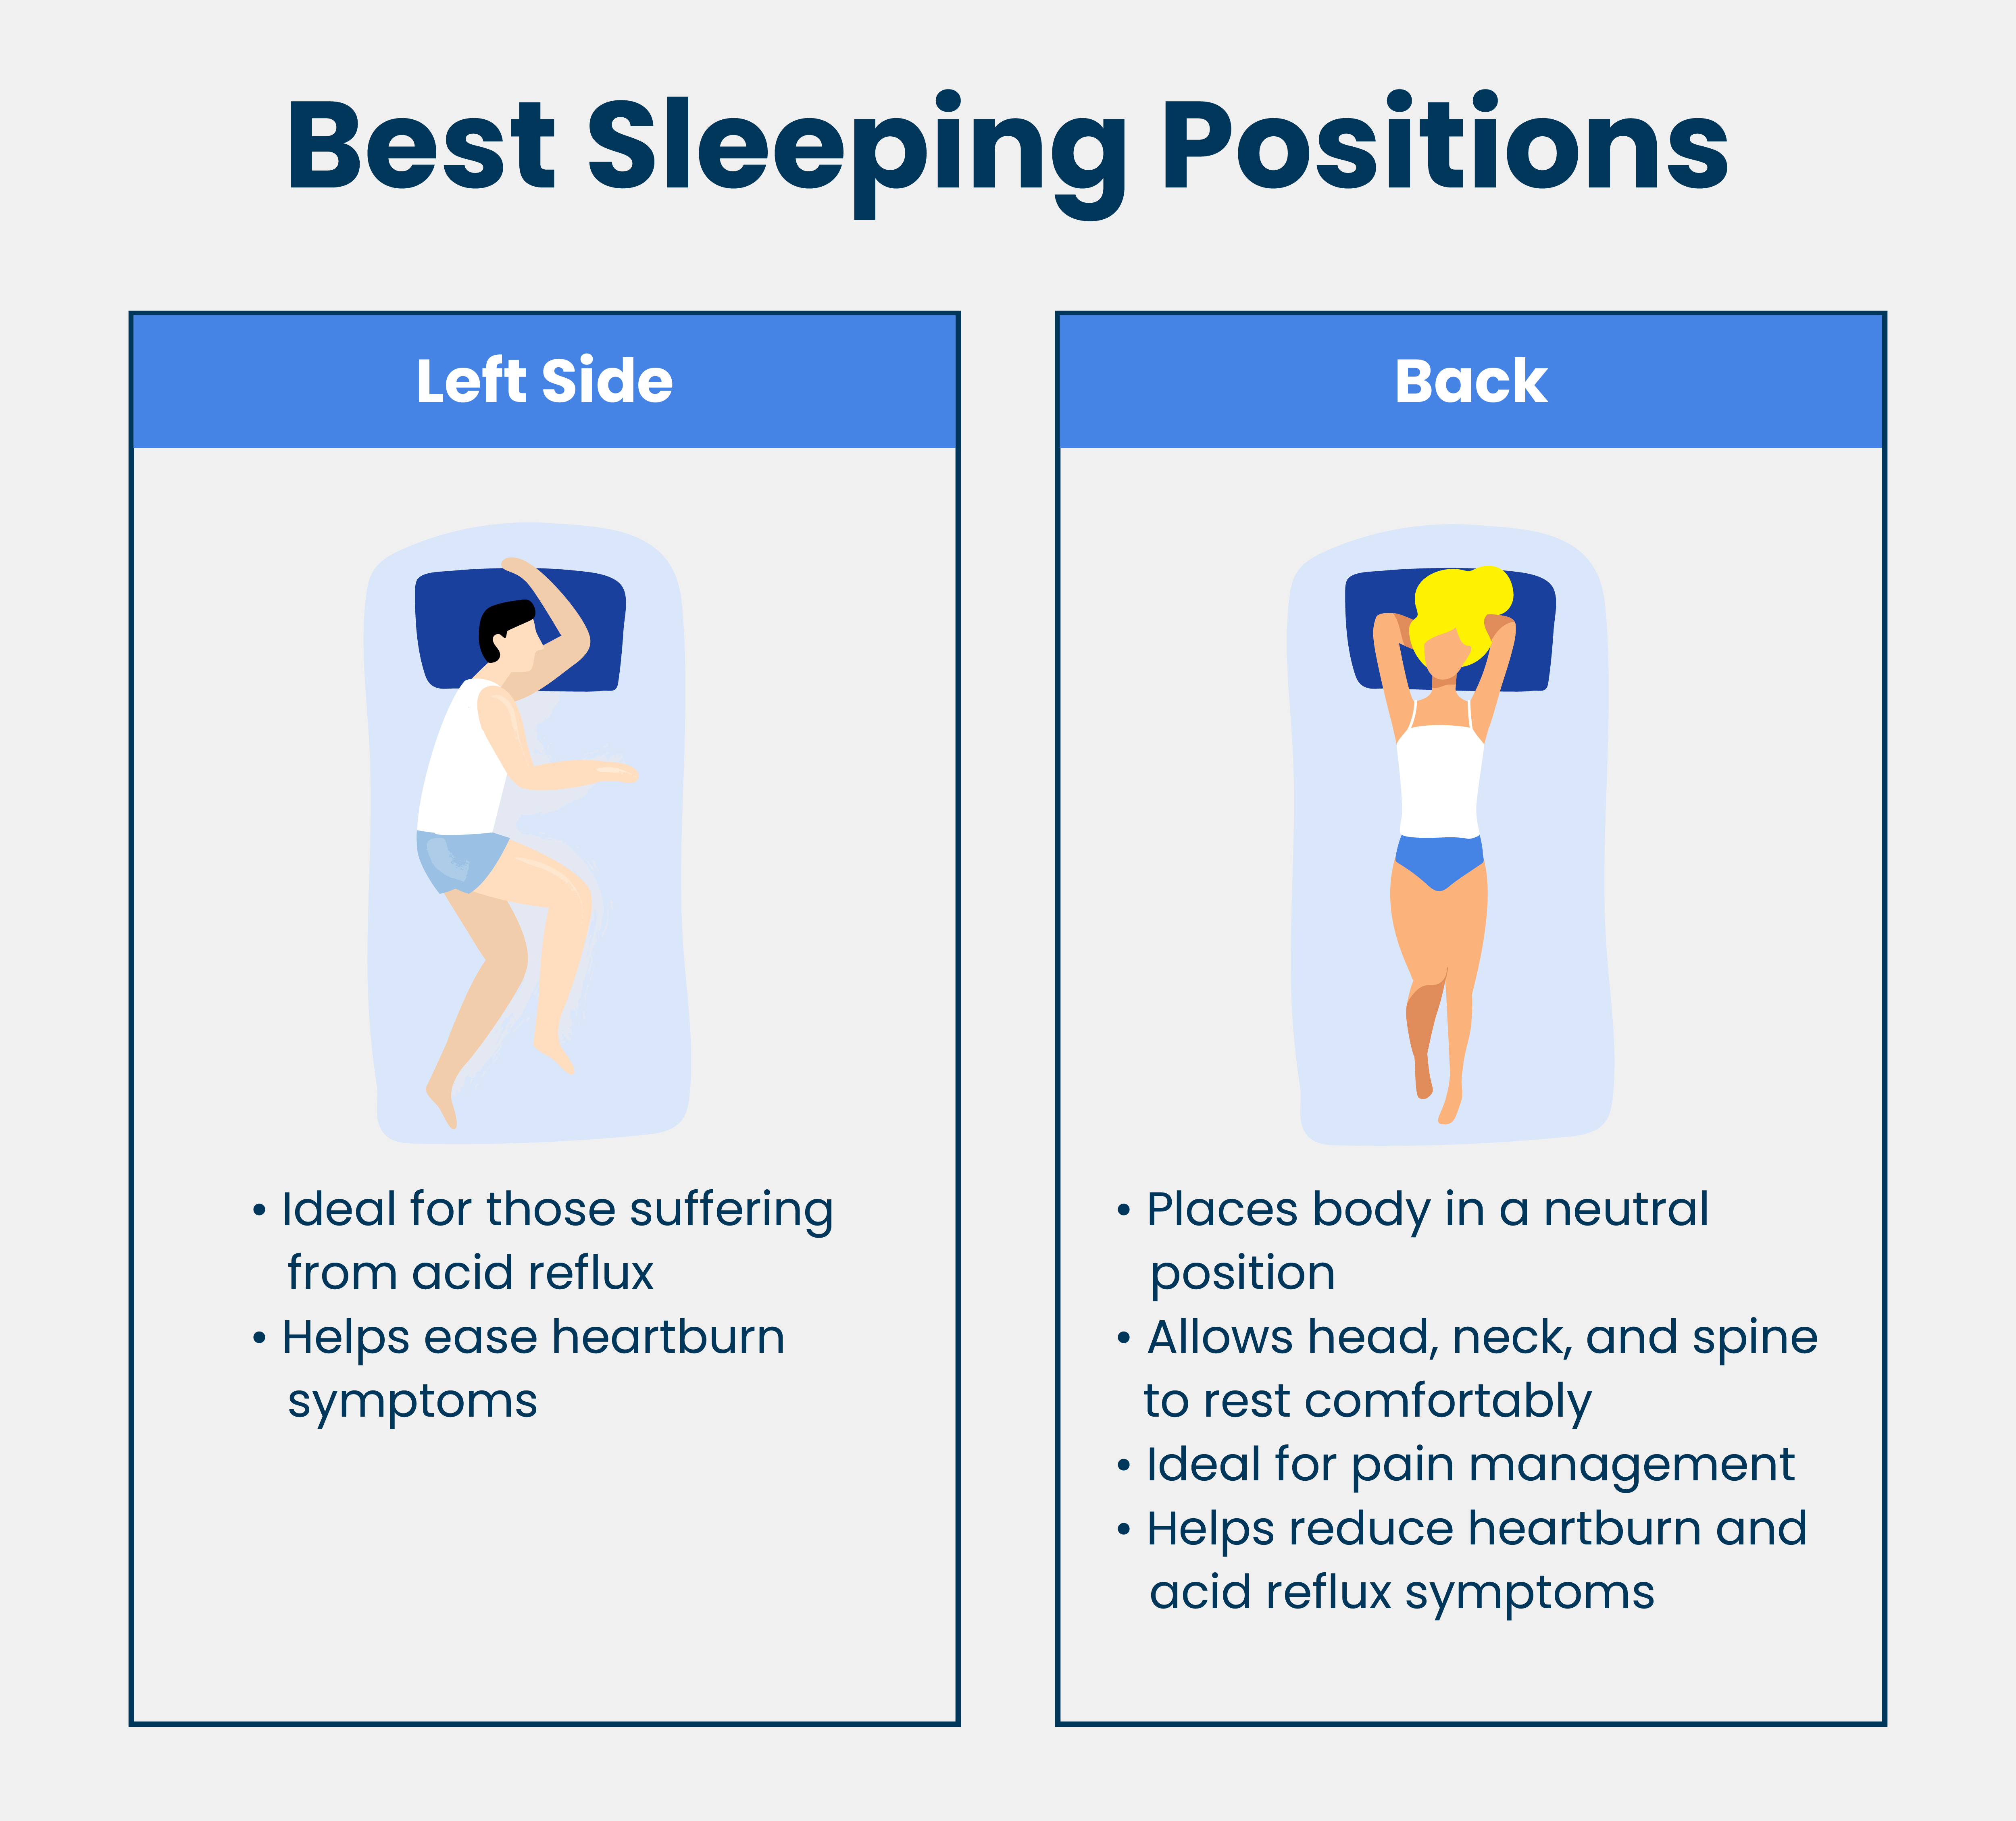 Get Proper Spinal Alignment While Sleeping With These